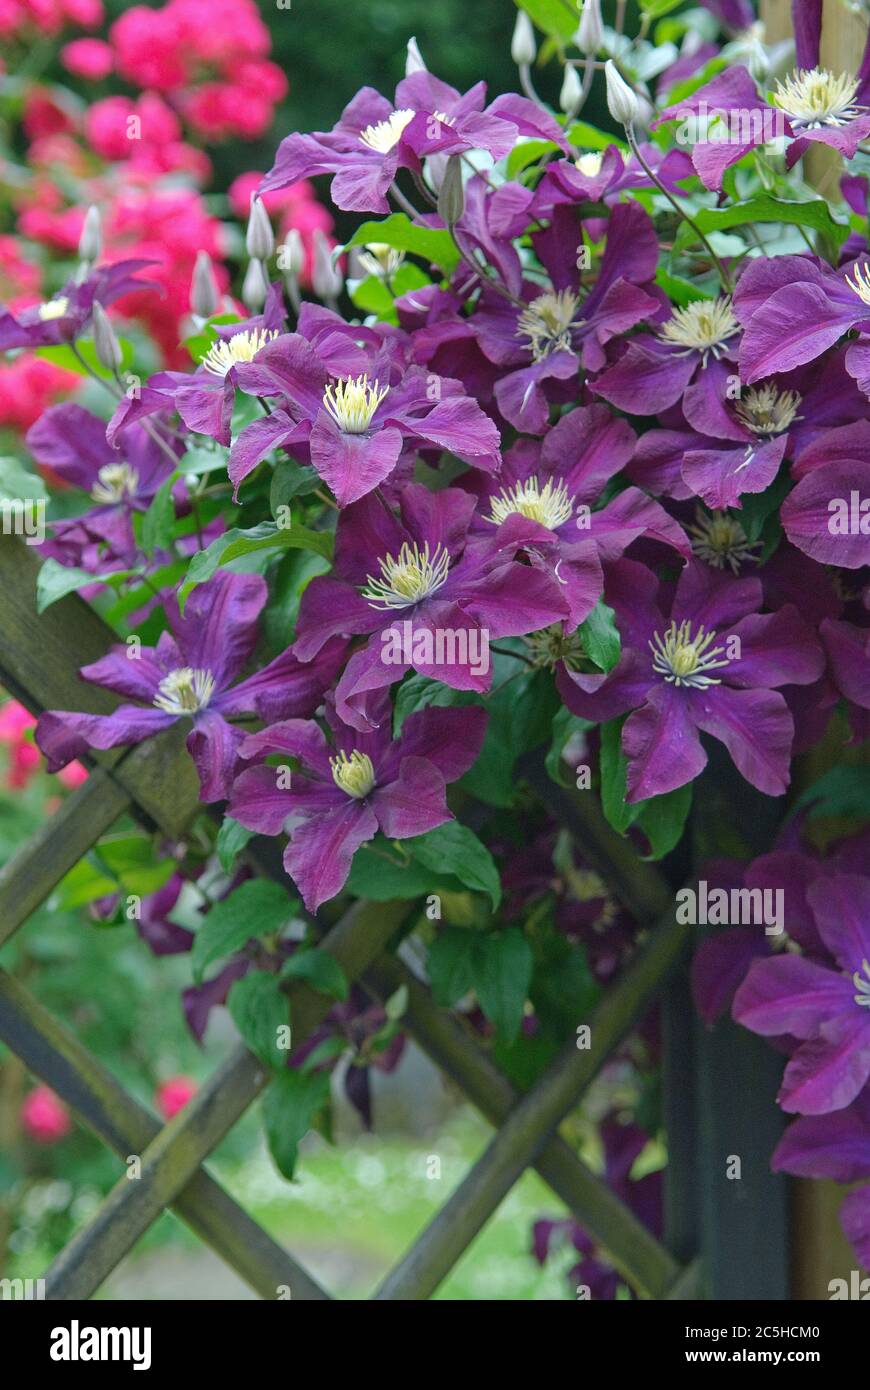 Grossblumige Waldrebe Clematis The Vagabond Stock Photo